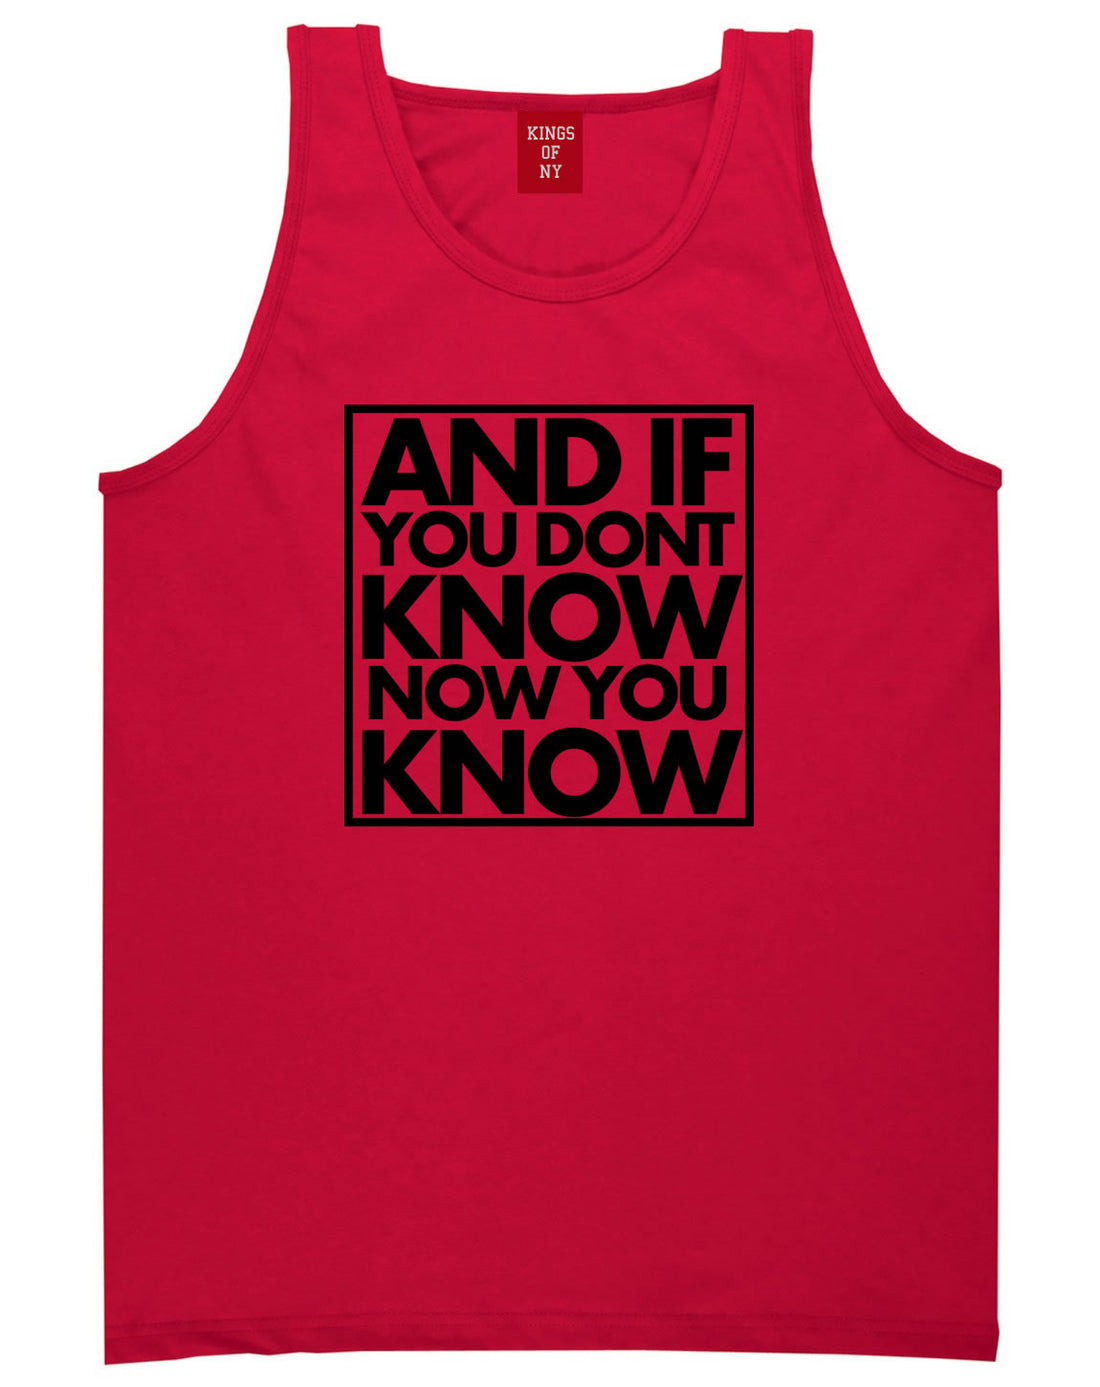 And If You Don't Know Now You Know Tank Top in Red By Kings Of NY